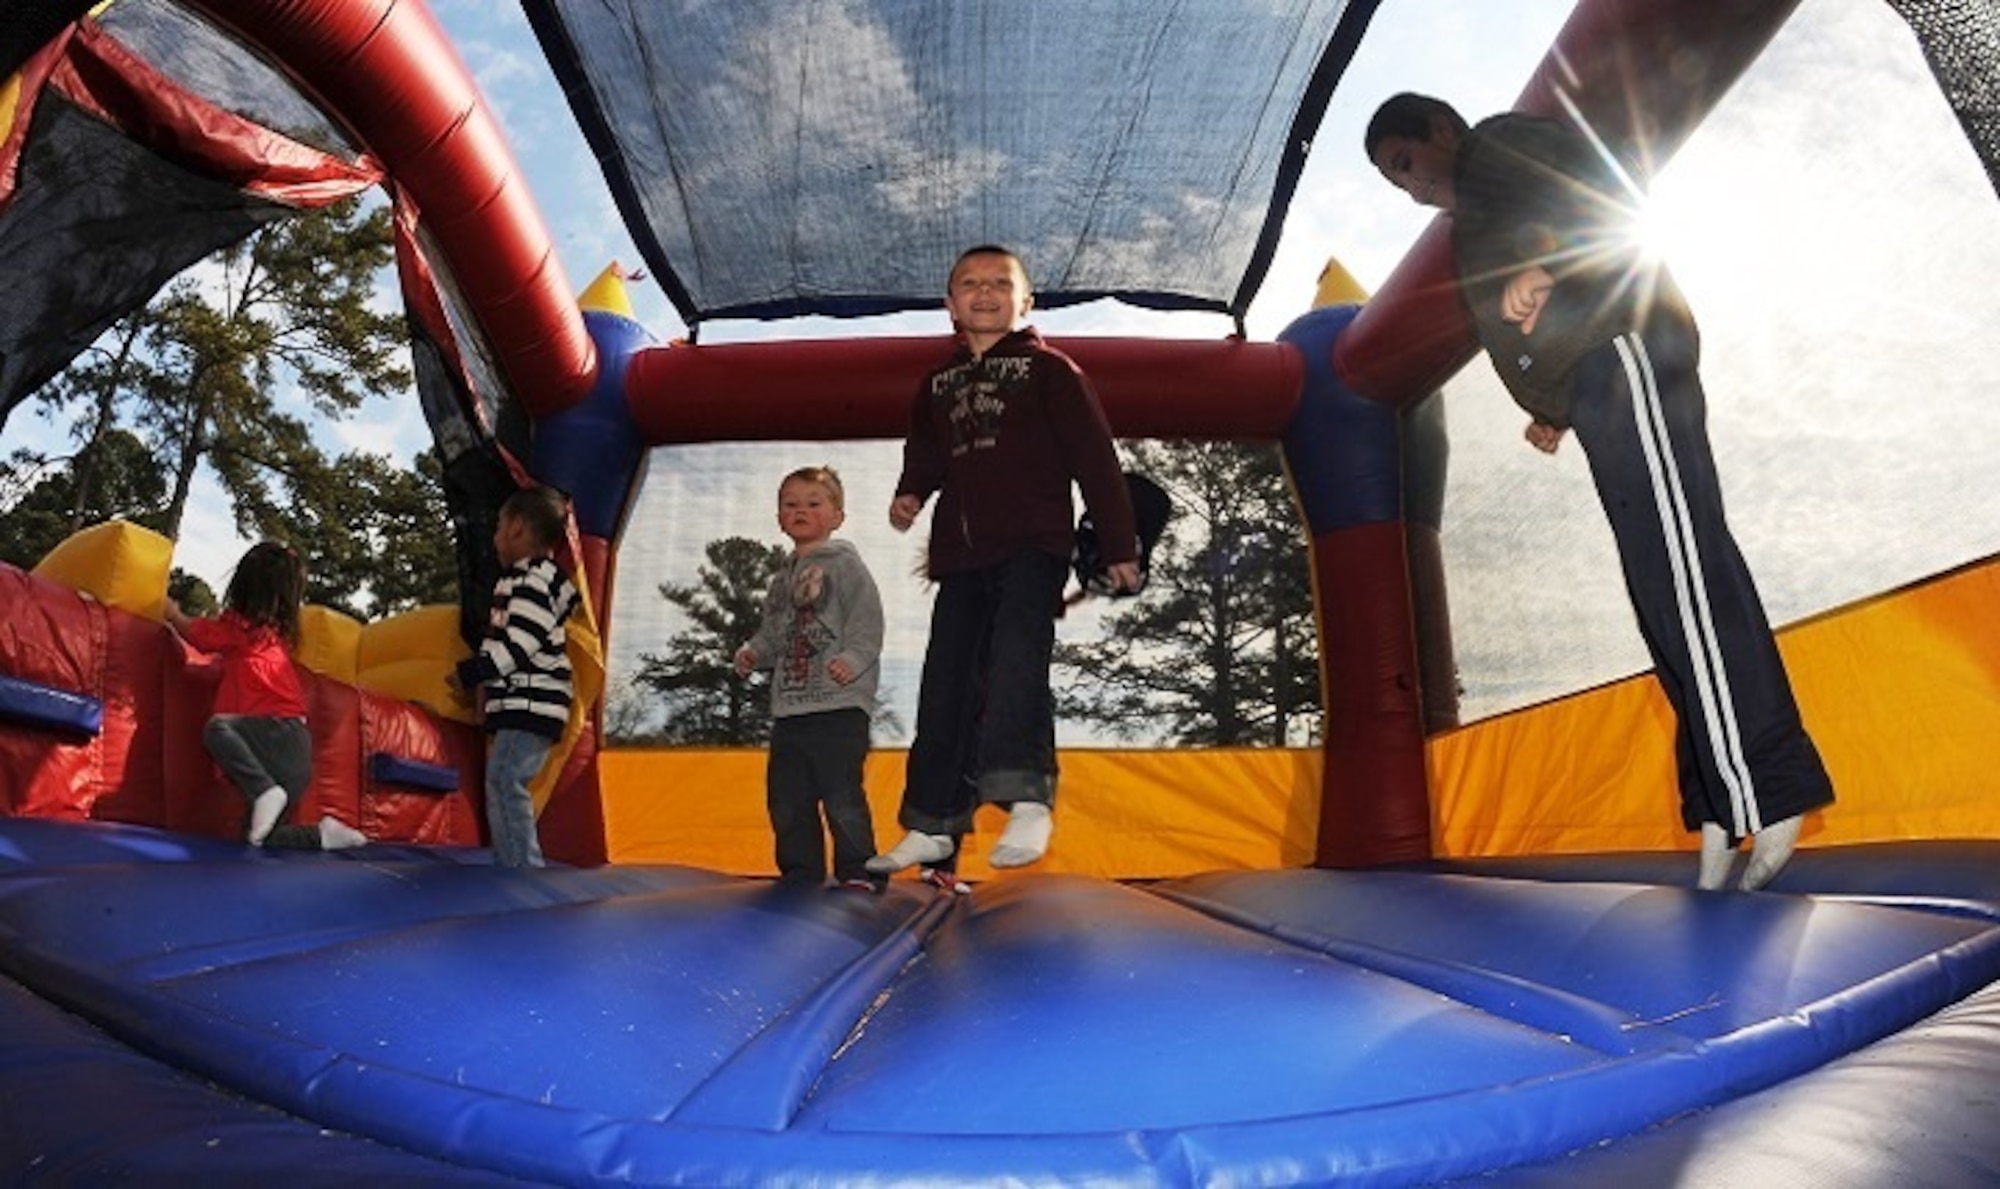 A group of children play inside of a bounce house during the Easter egg hunt event at Debden Park on Seymour Johnson Air Force Base, N.C., March 30, 2013. The bounce house was a side activity those who came out to the hunt could play in. (U.S. Air Force photo/Airman 1st Class John Nieves Camacho/Released)